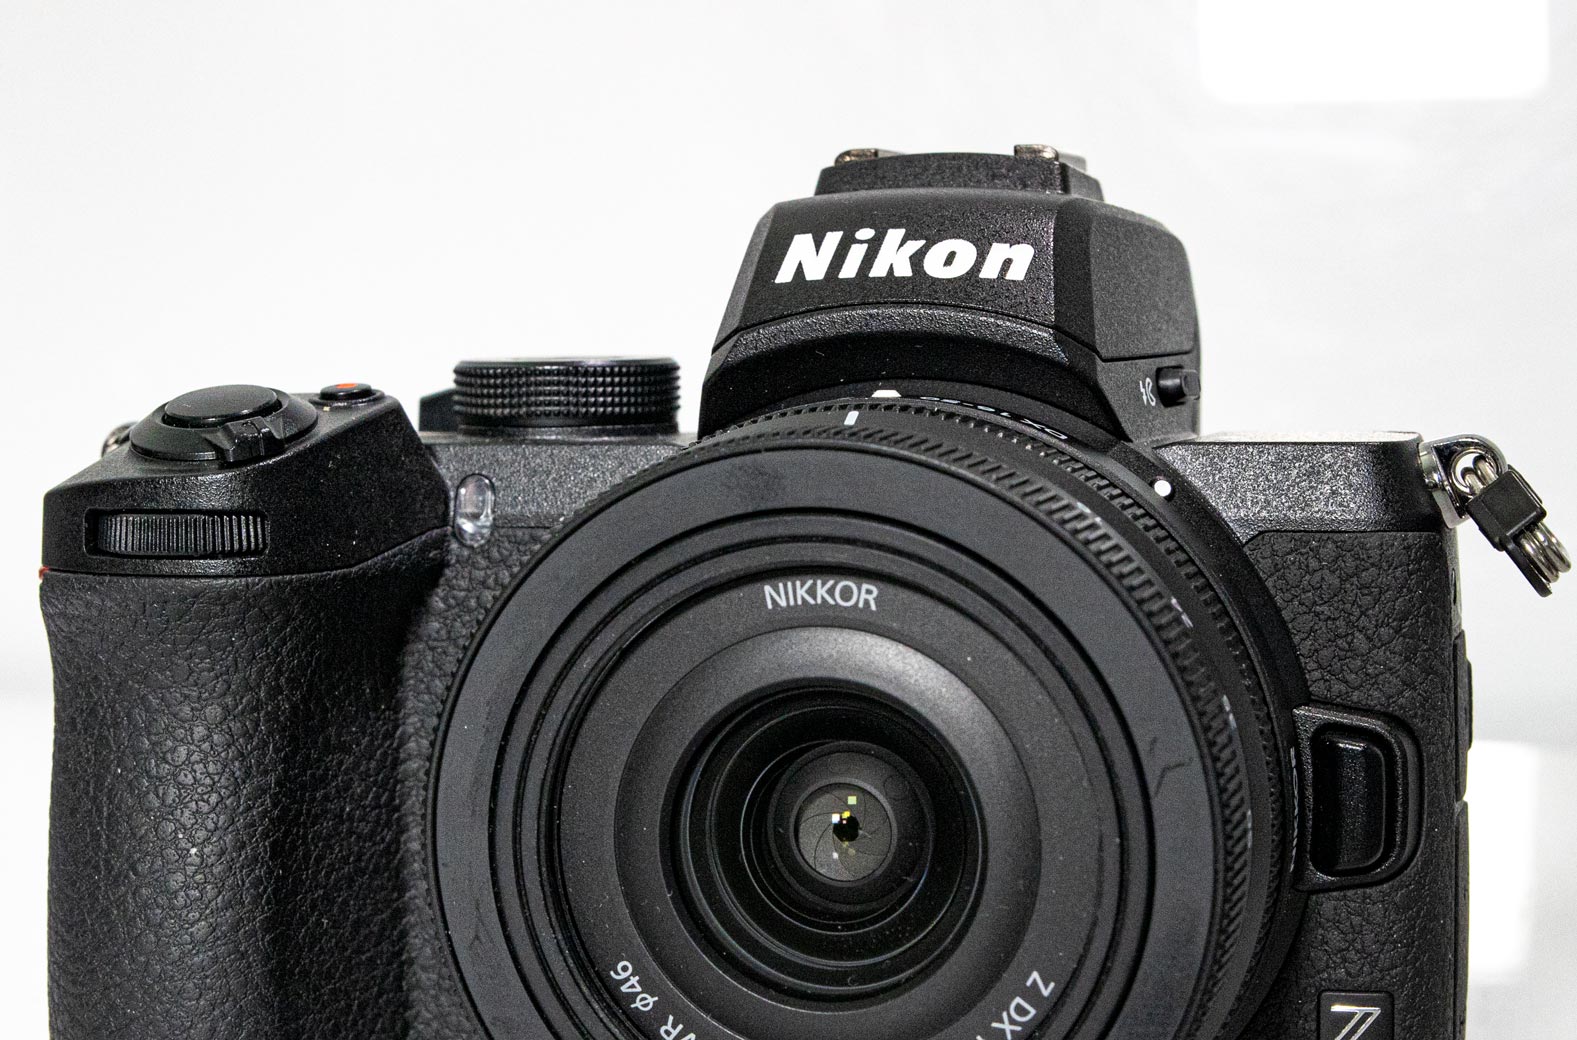 Nikon Z50 hands-on review: Big lens mount but short on features